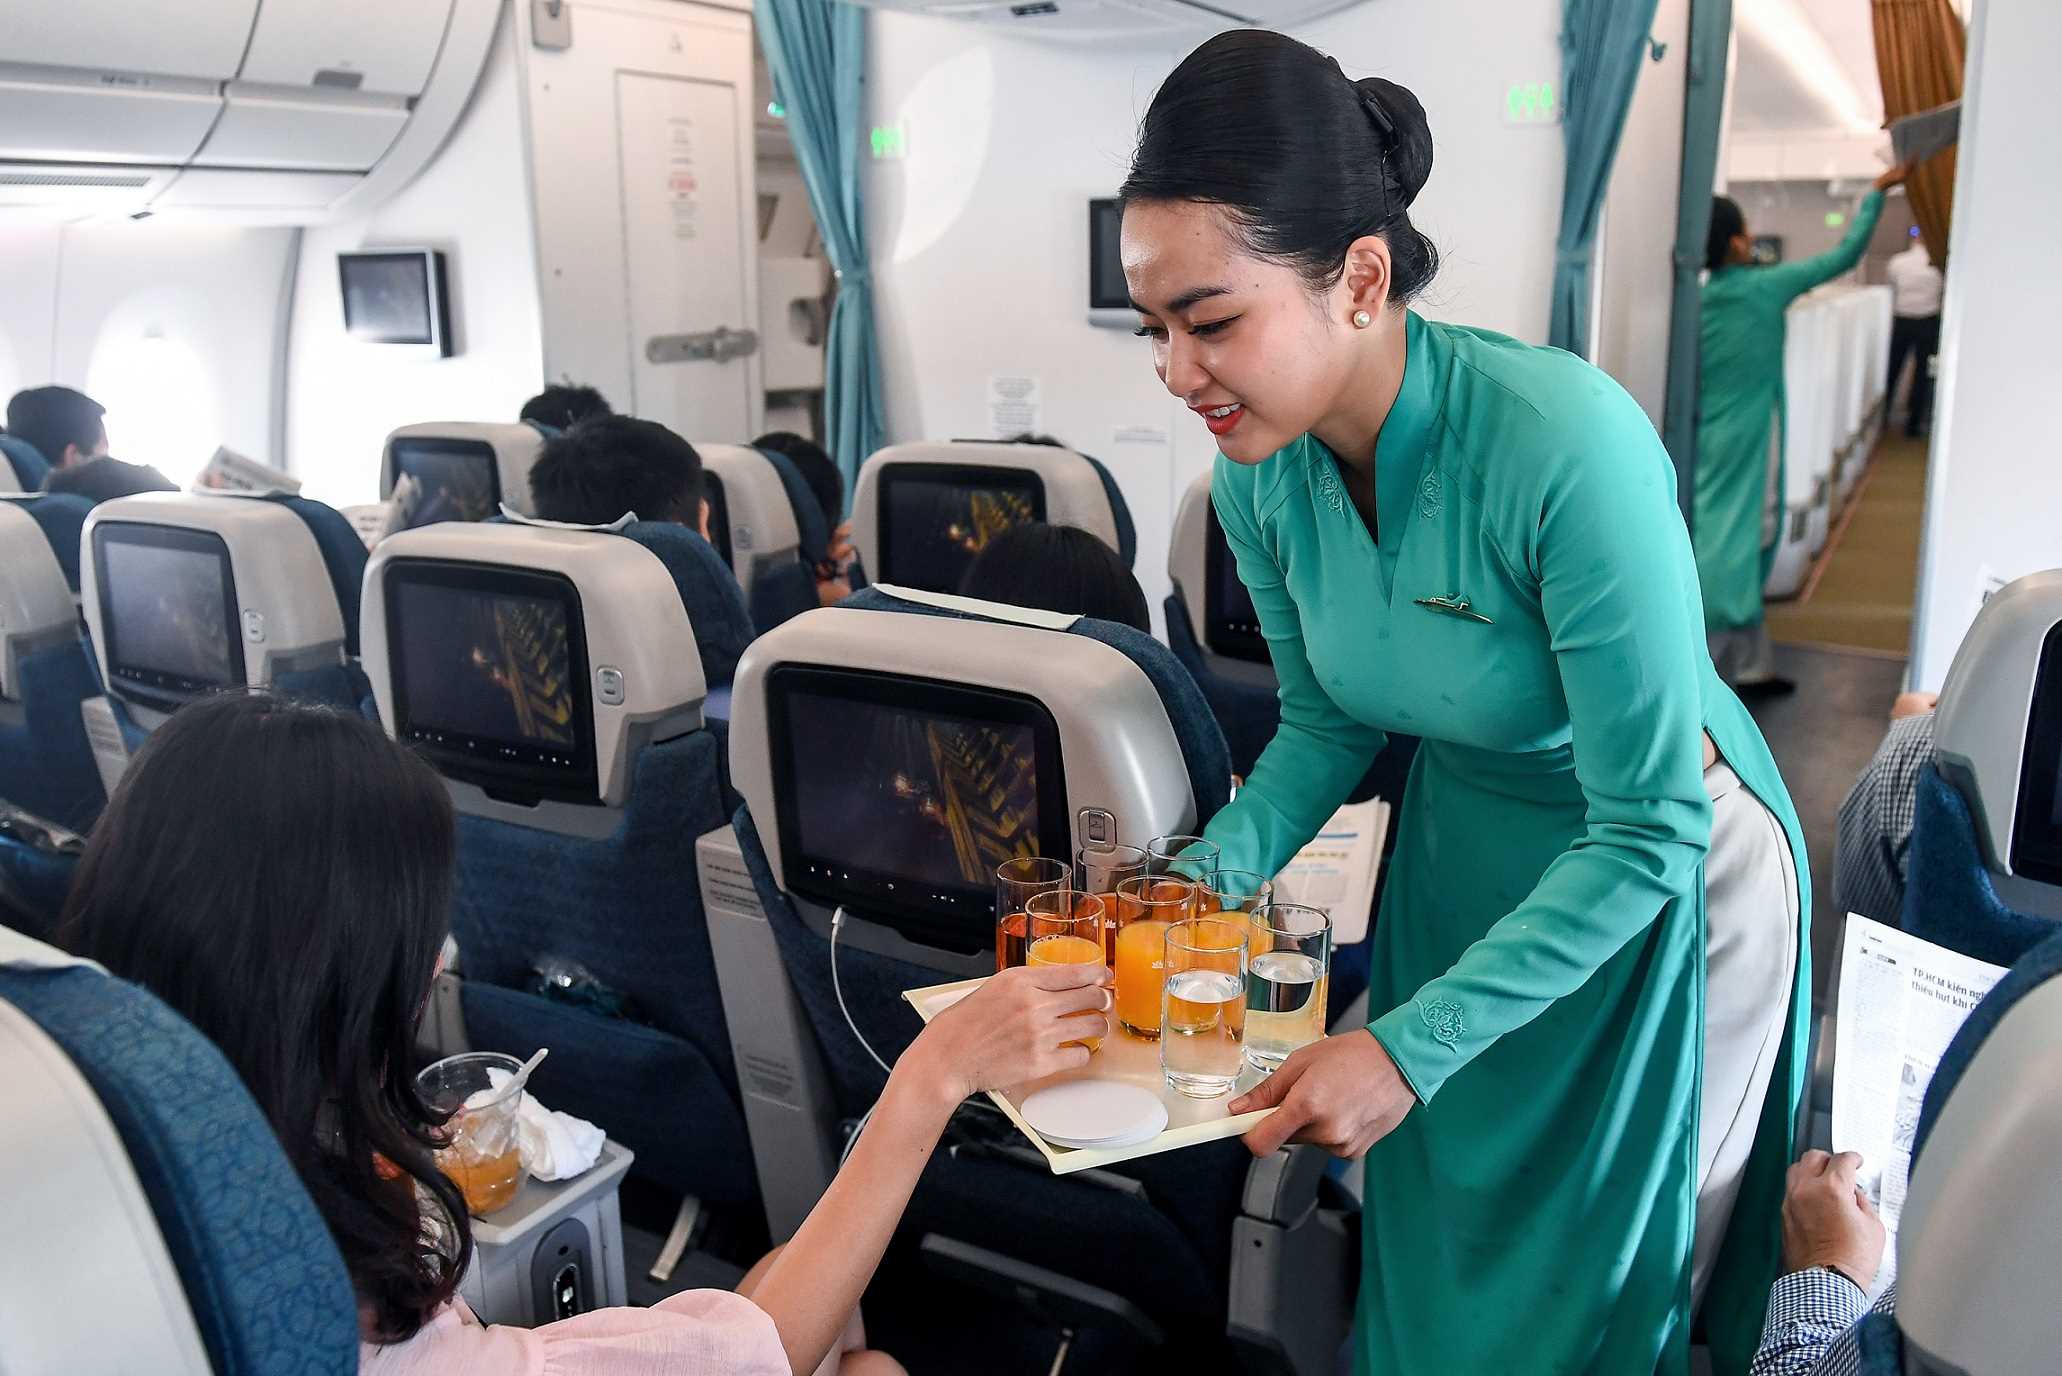 Vietnam Airlines offers a robust flight schedule catering to travelers journeying from Kuala Lumpur (KUL) to Frankfurt (FRA), operating approximately 30 flights per week